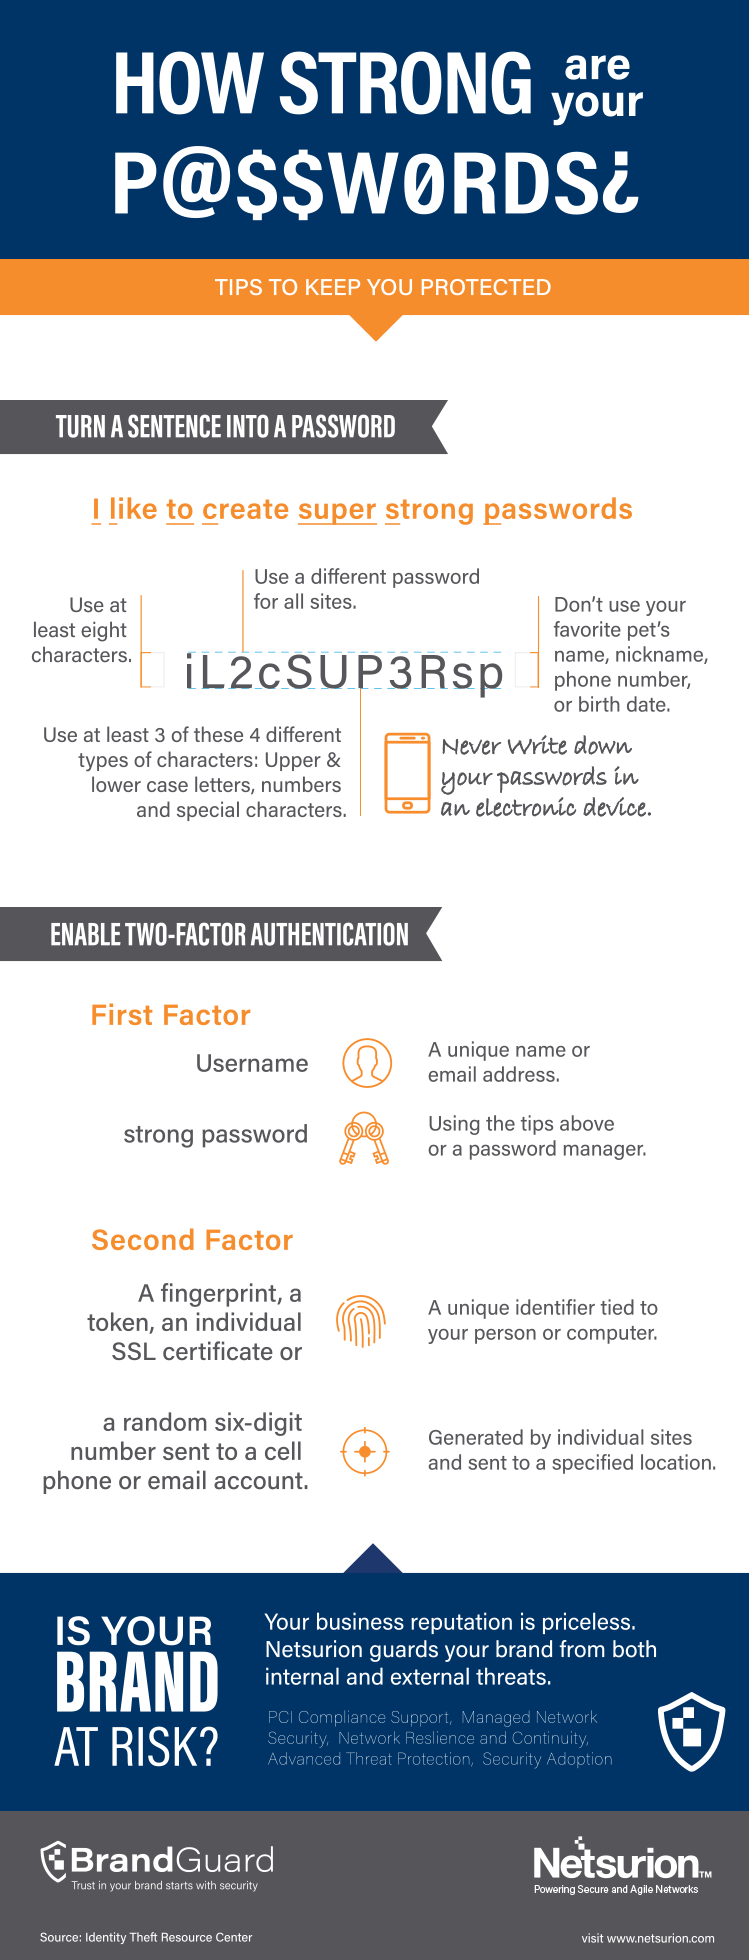 how strong are your passwords infographic